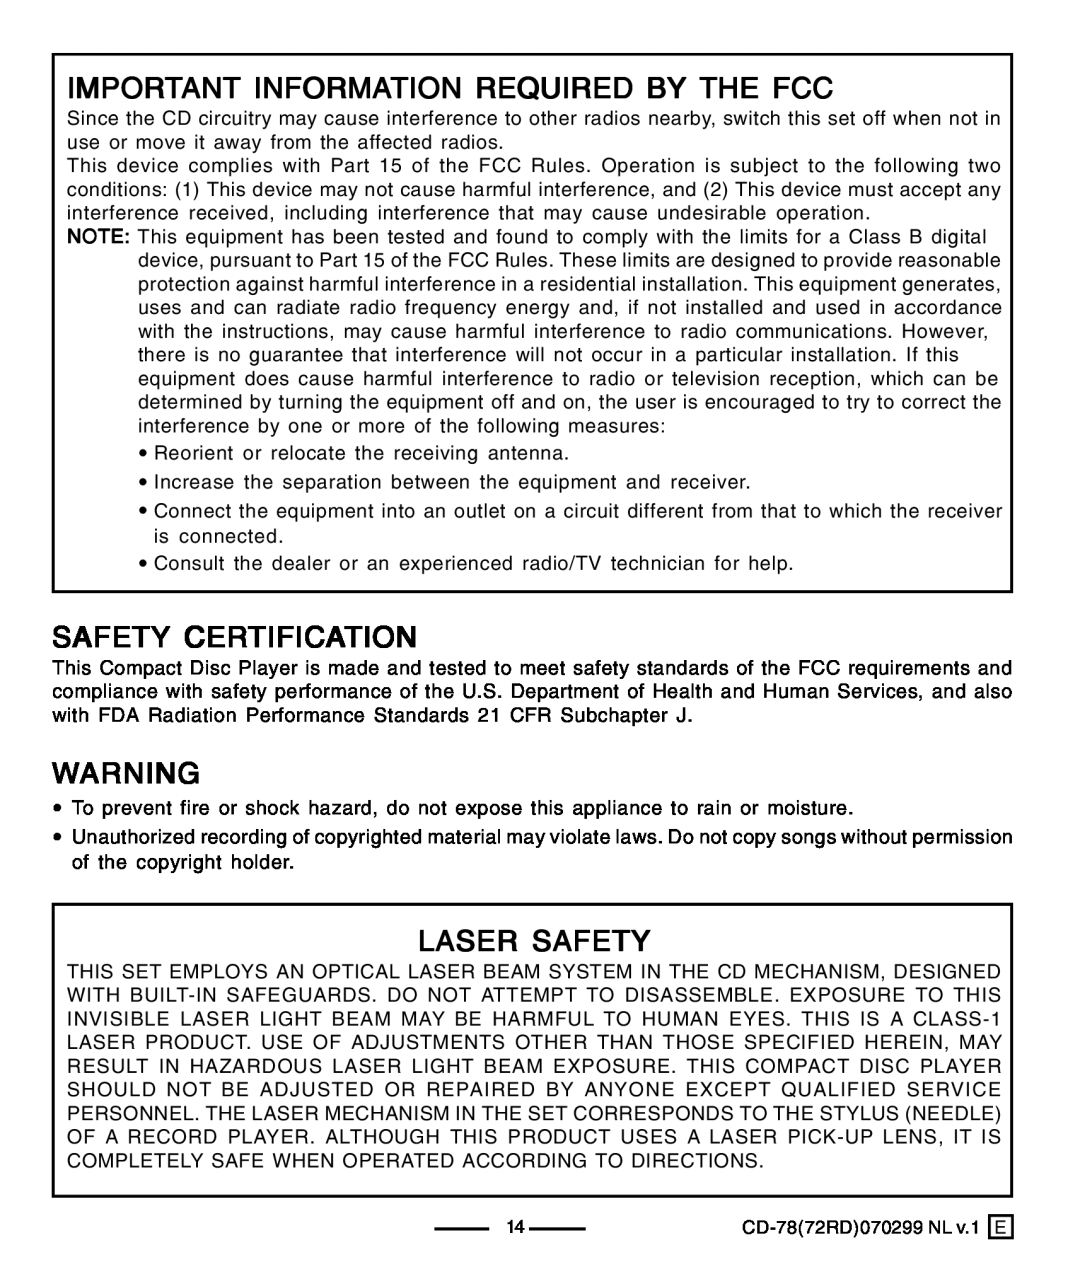 Lenoxx Electronics CD-78 Important Information Required By The Fcc, Safety Certification, Laser Safety 